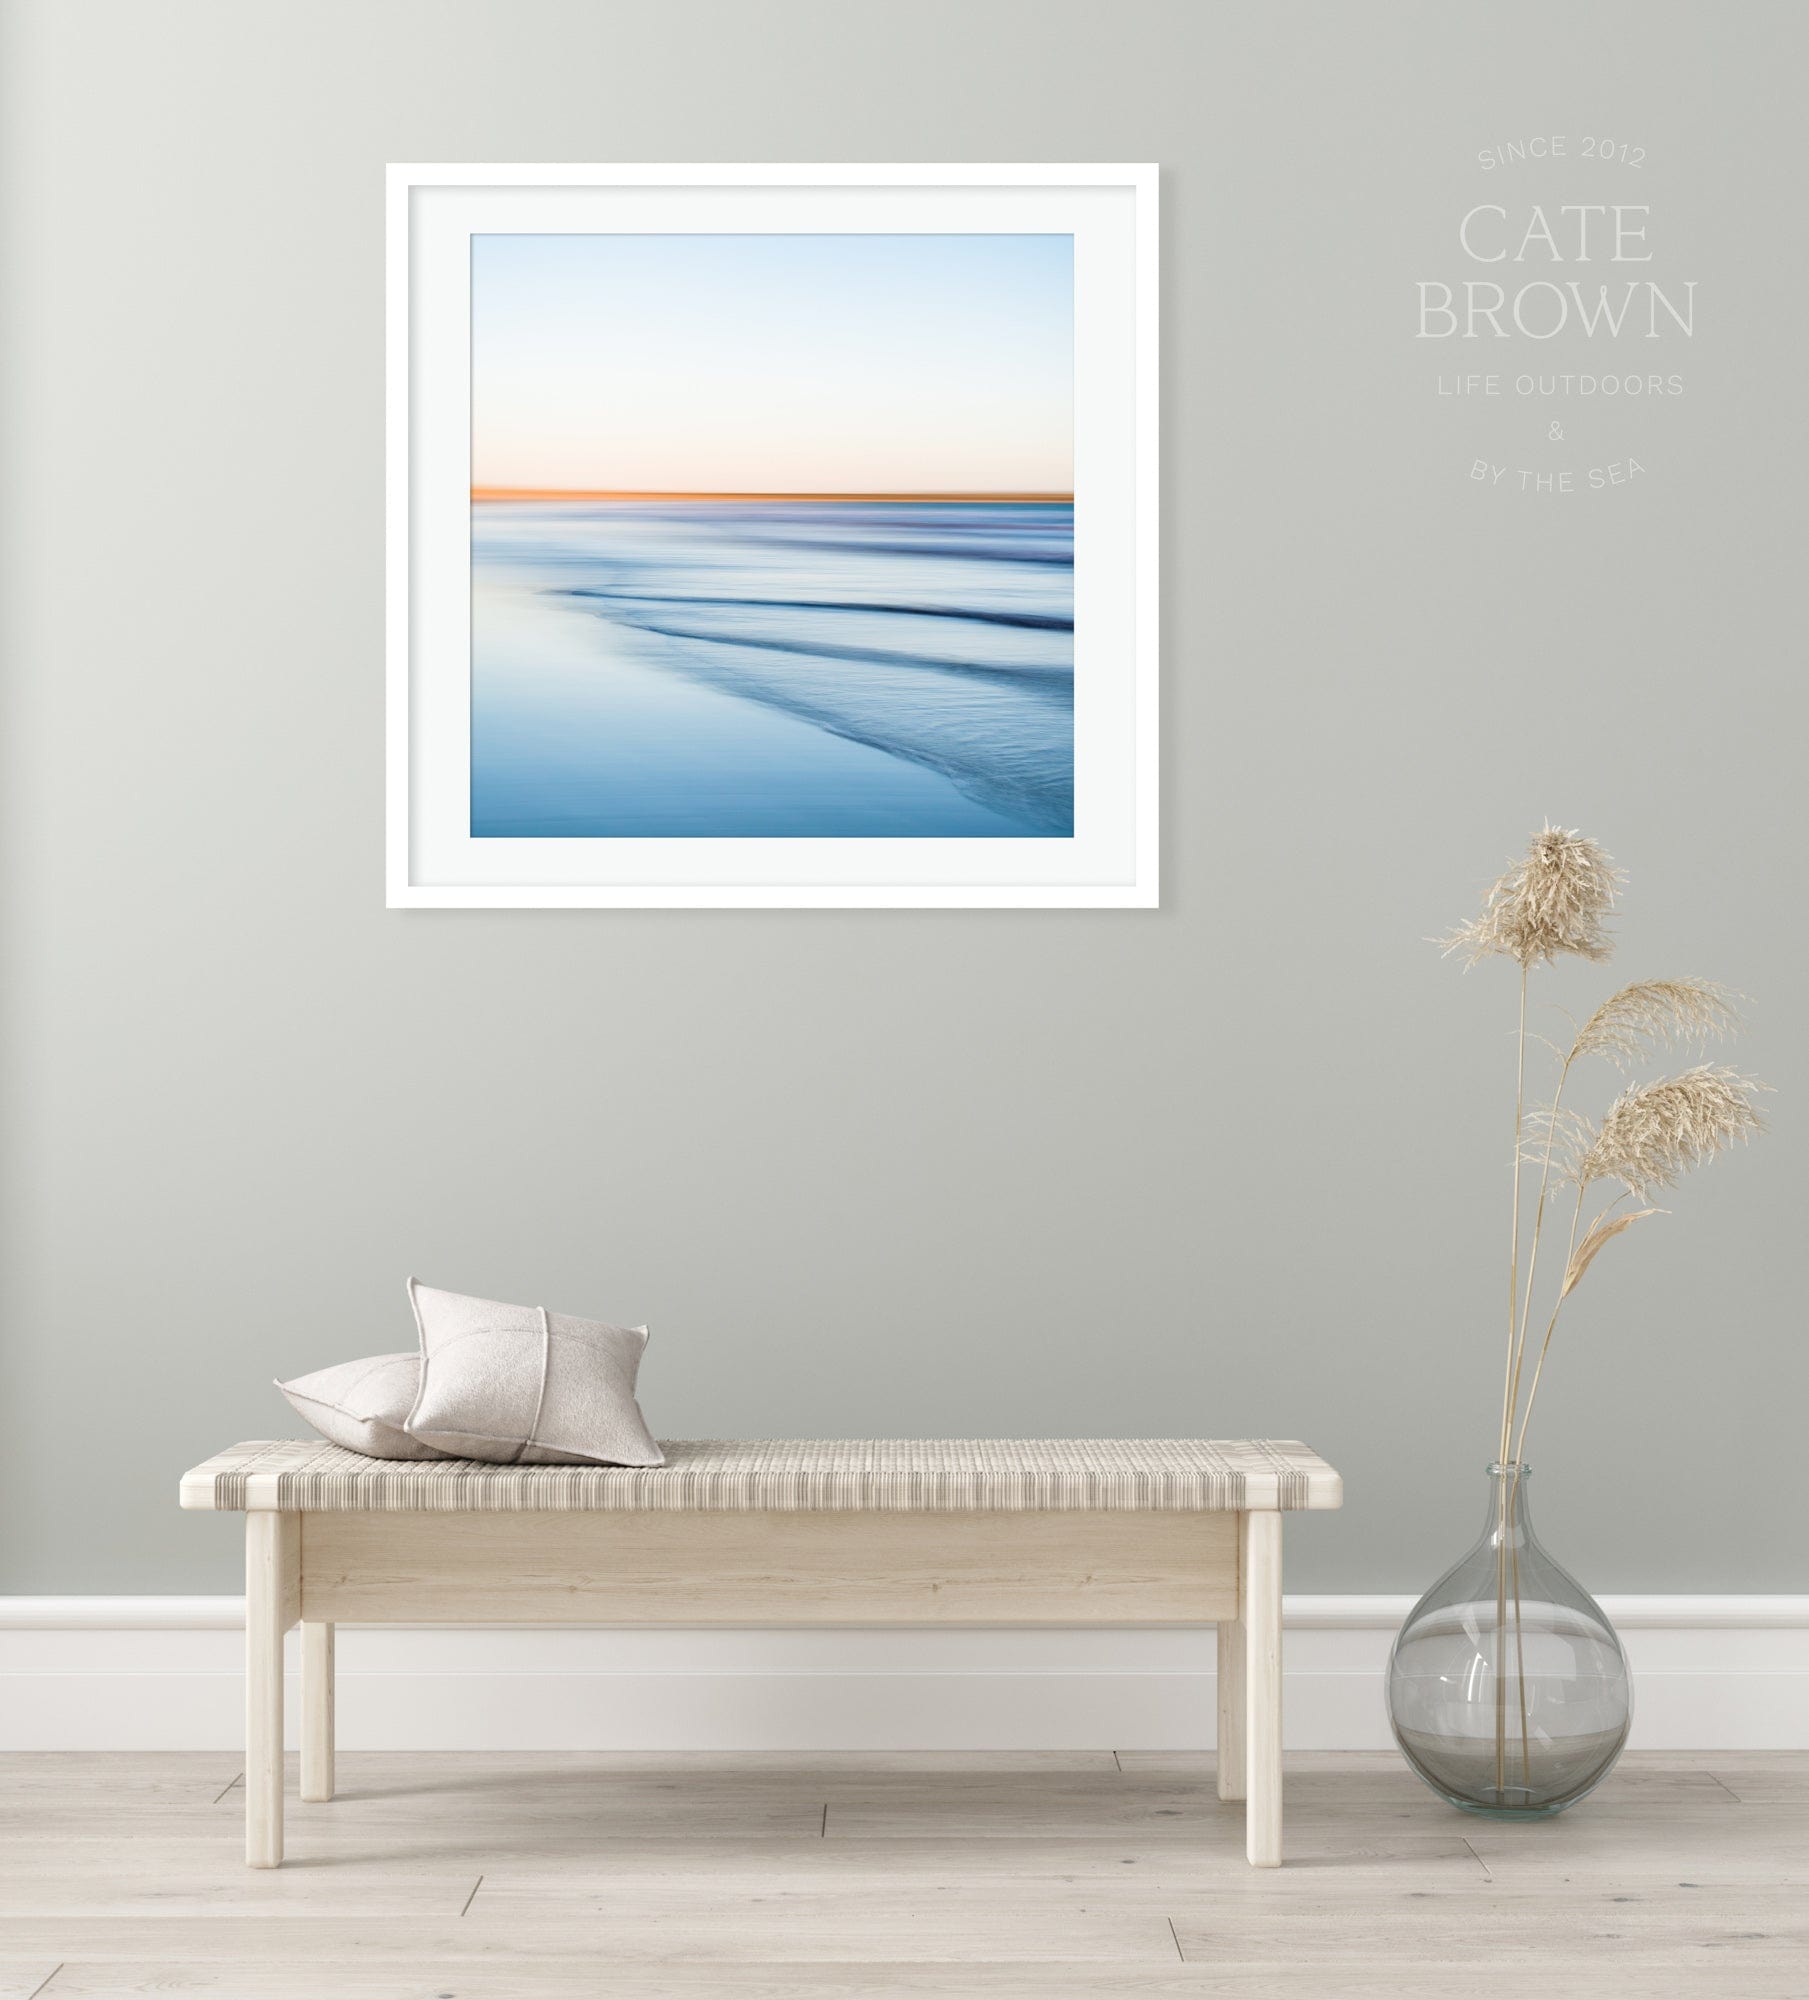 Cate Brown Photo Fine Art Print / 8"x8" / None (Print Only) Sachuest #4  //  Abstract Photography Made to Order Ocean Fine Art